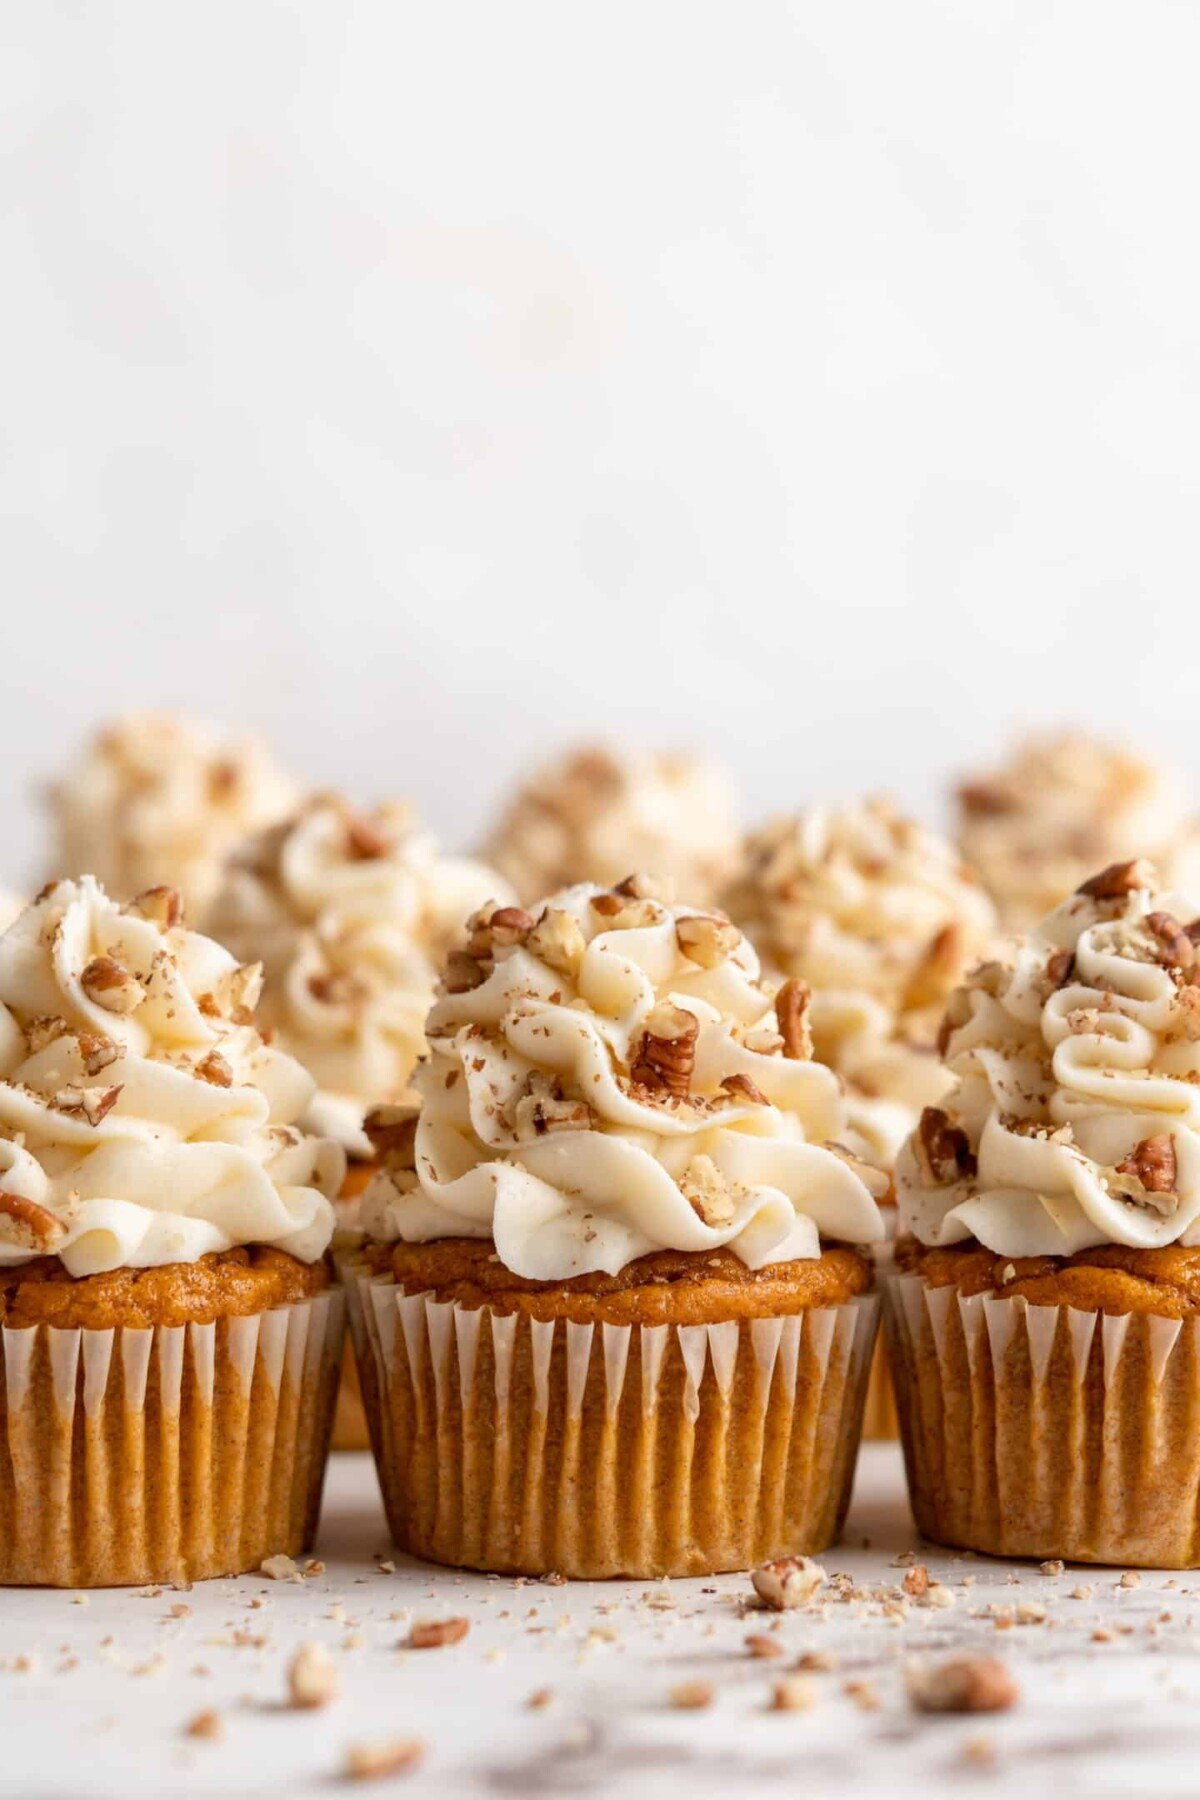 Three pumpkin cupcakes topped with cream cheese and pecans, with three more behind them.